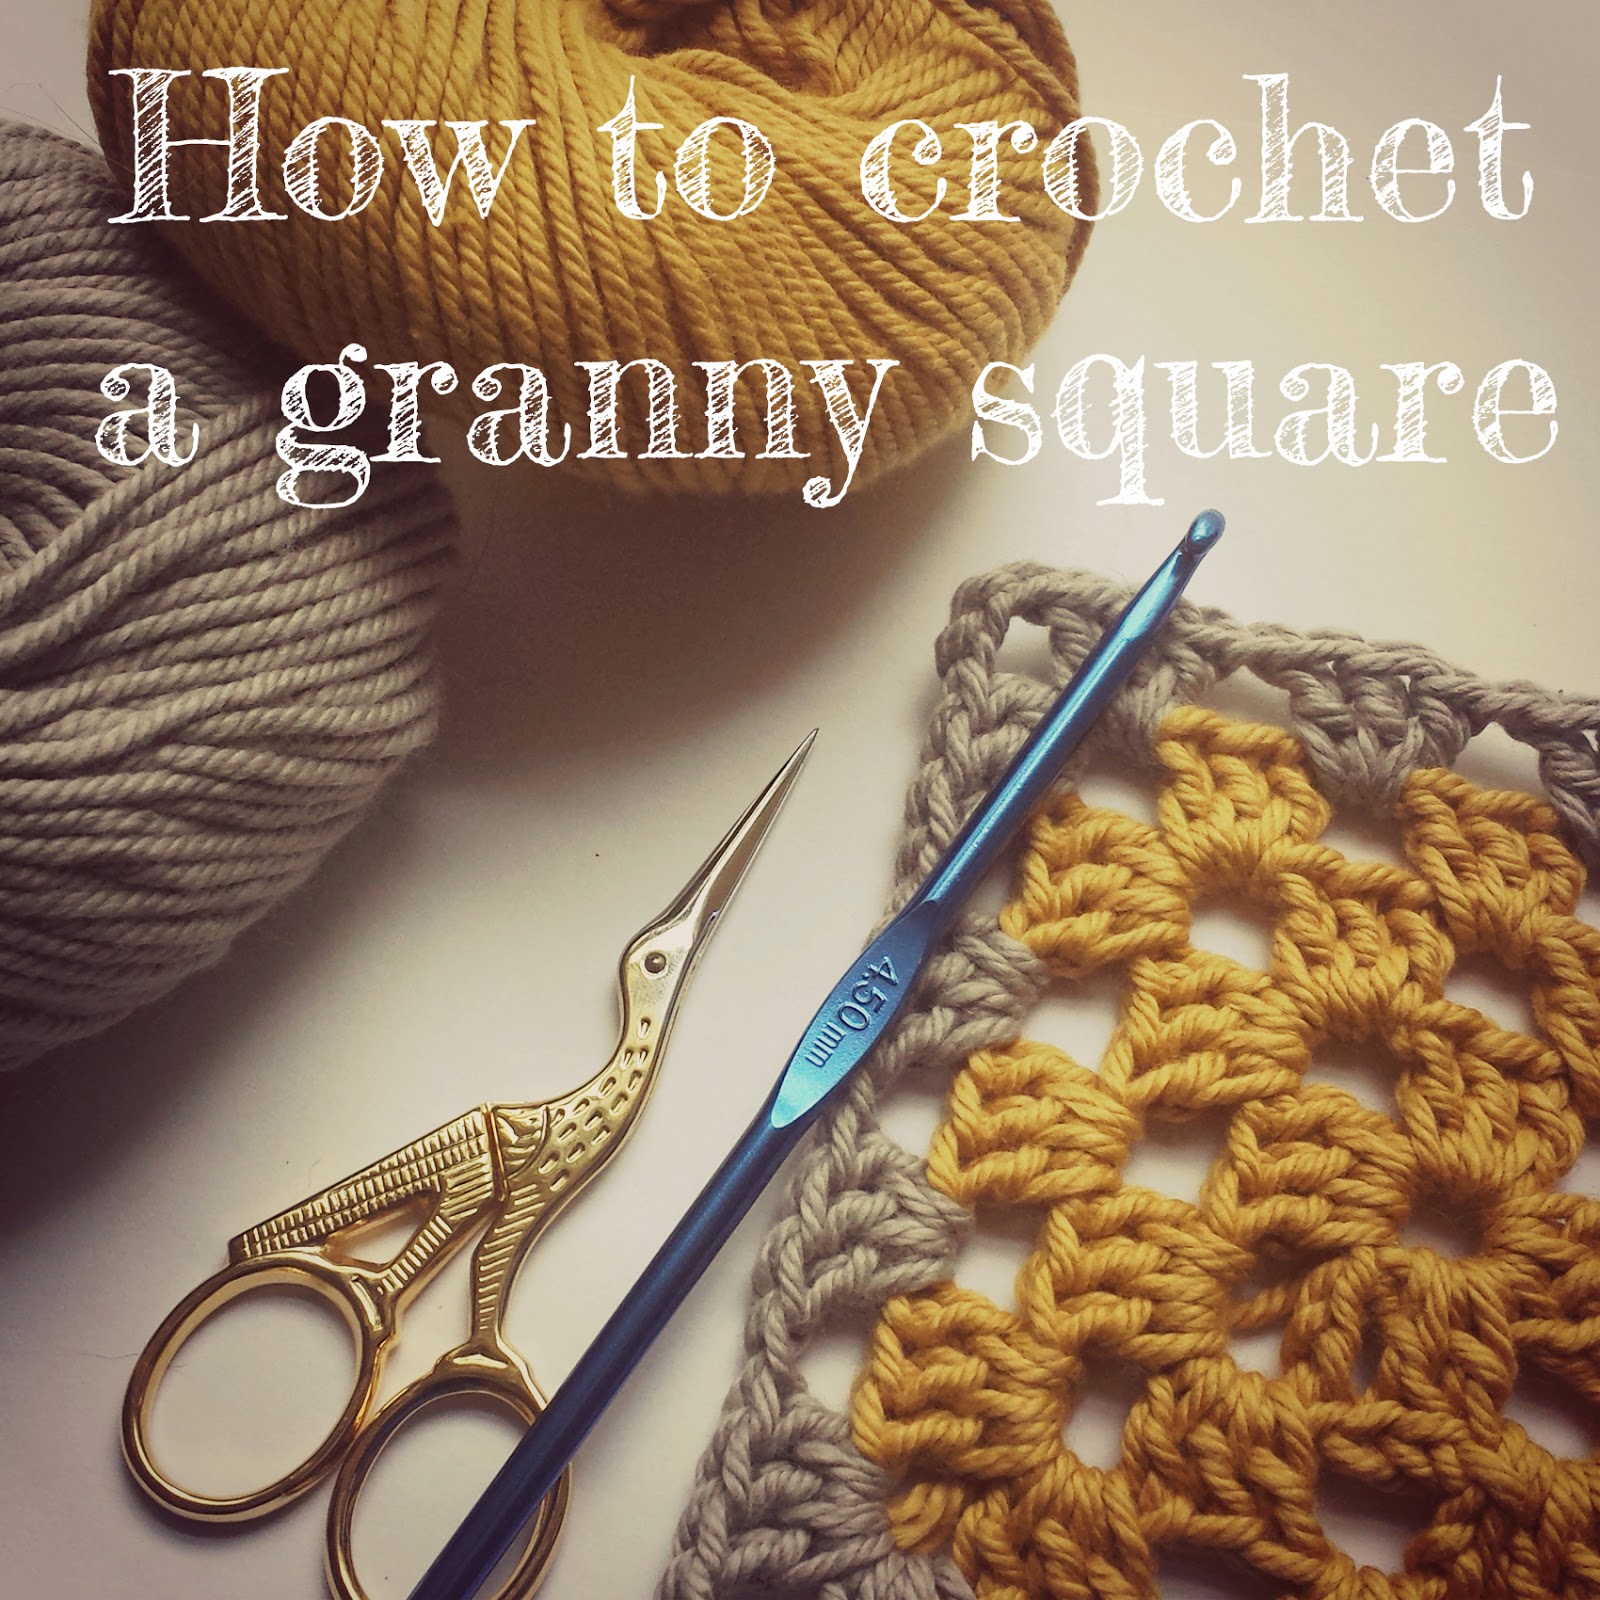 Crochet Granny Square Tutorial ~ Hooked by Robin